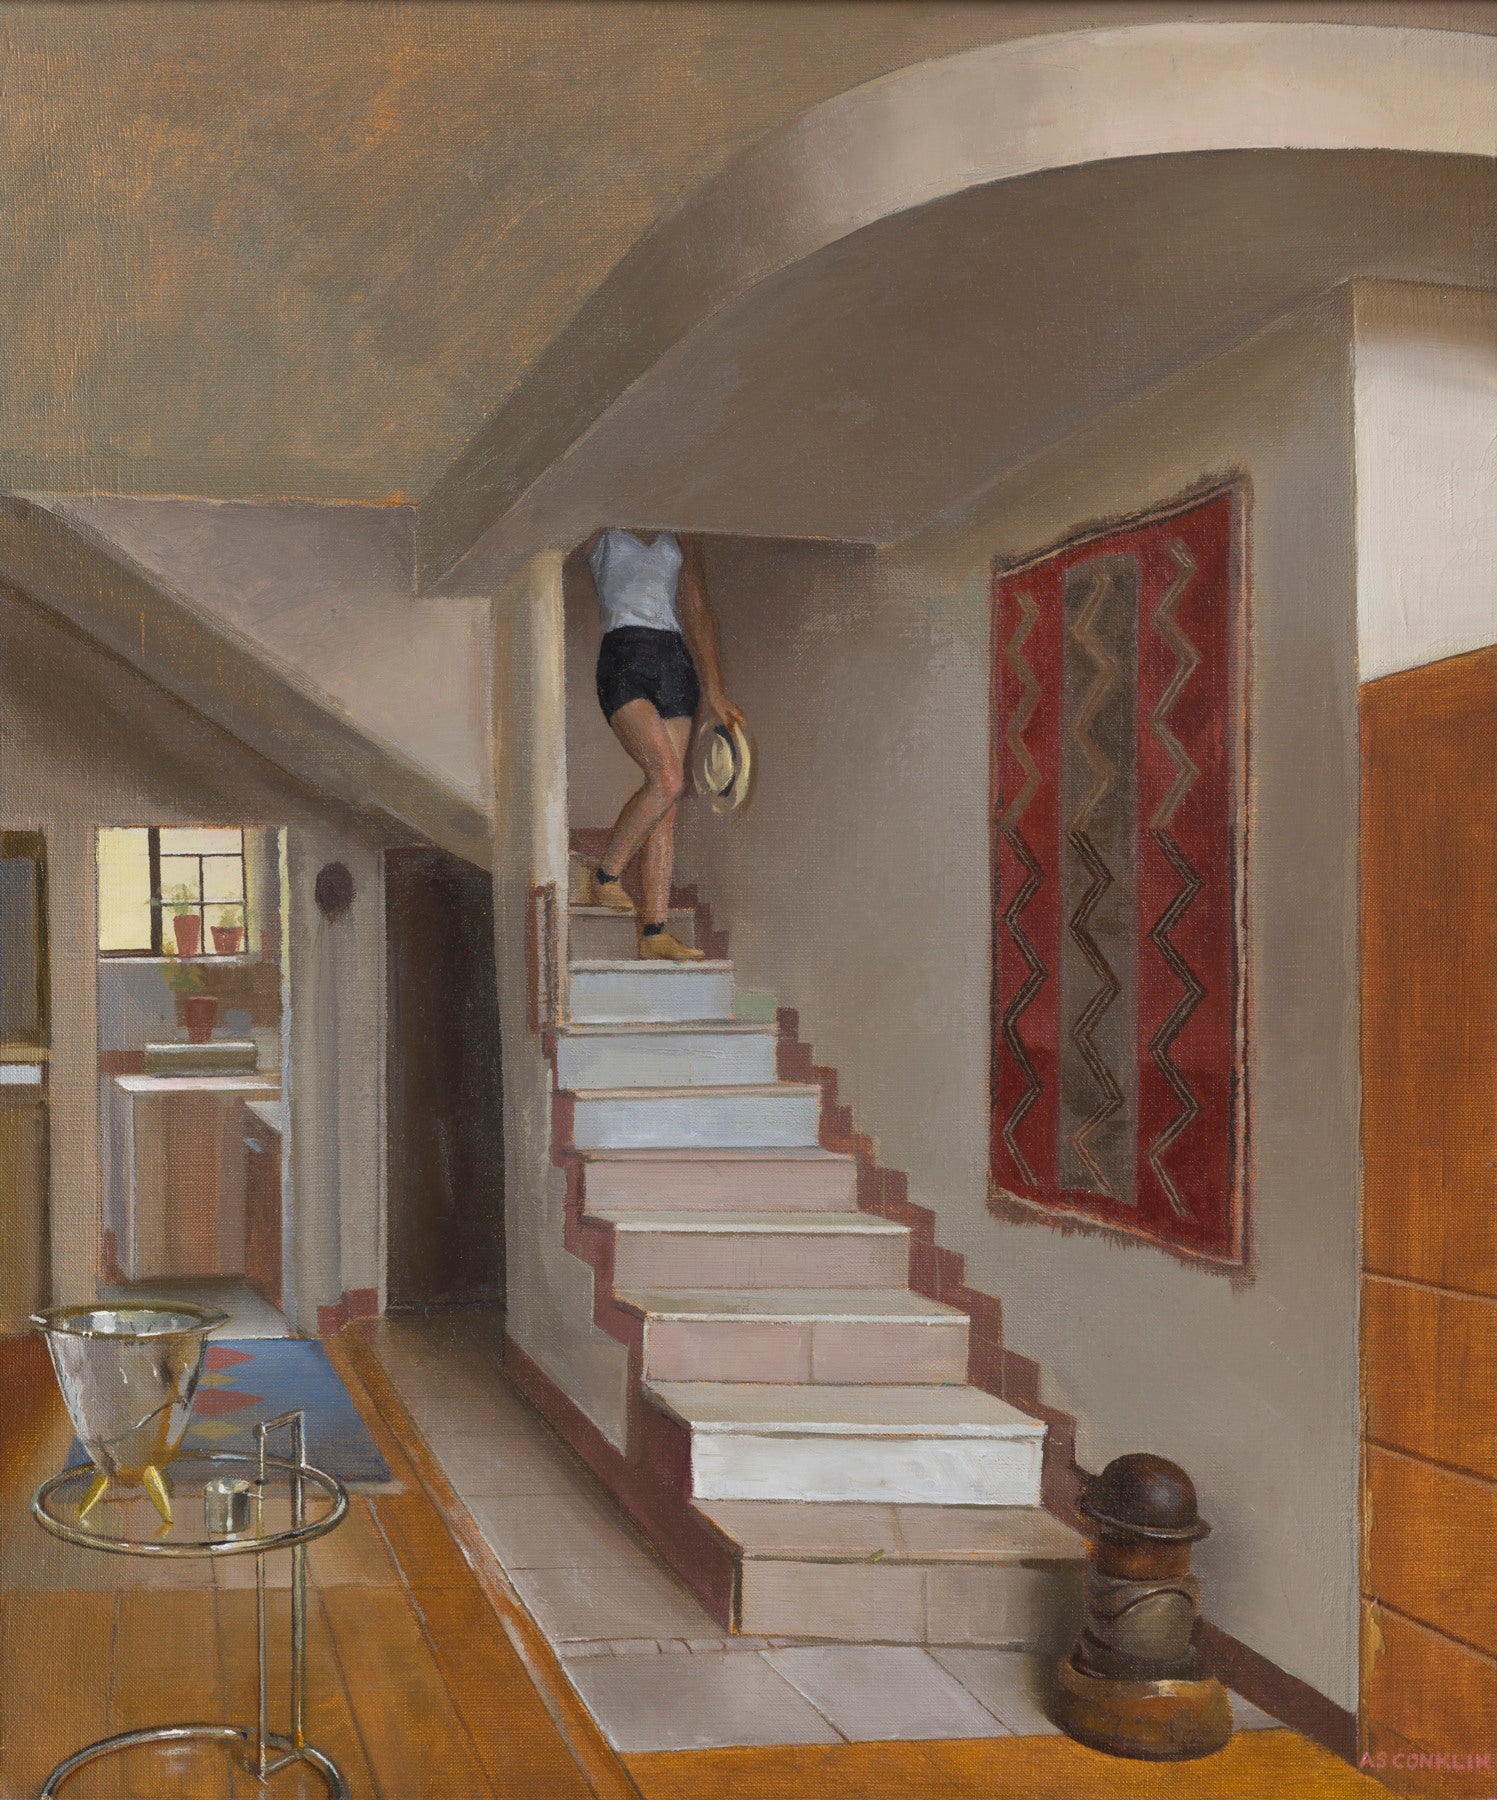 Andrew S. Conklin - Carl St. Studio Stairs